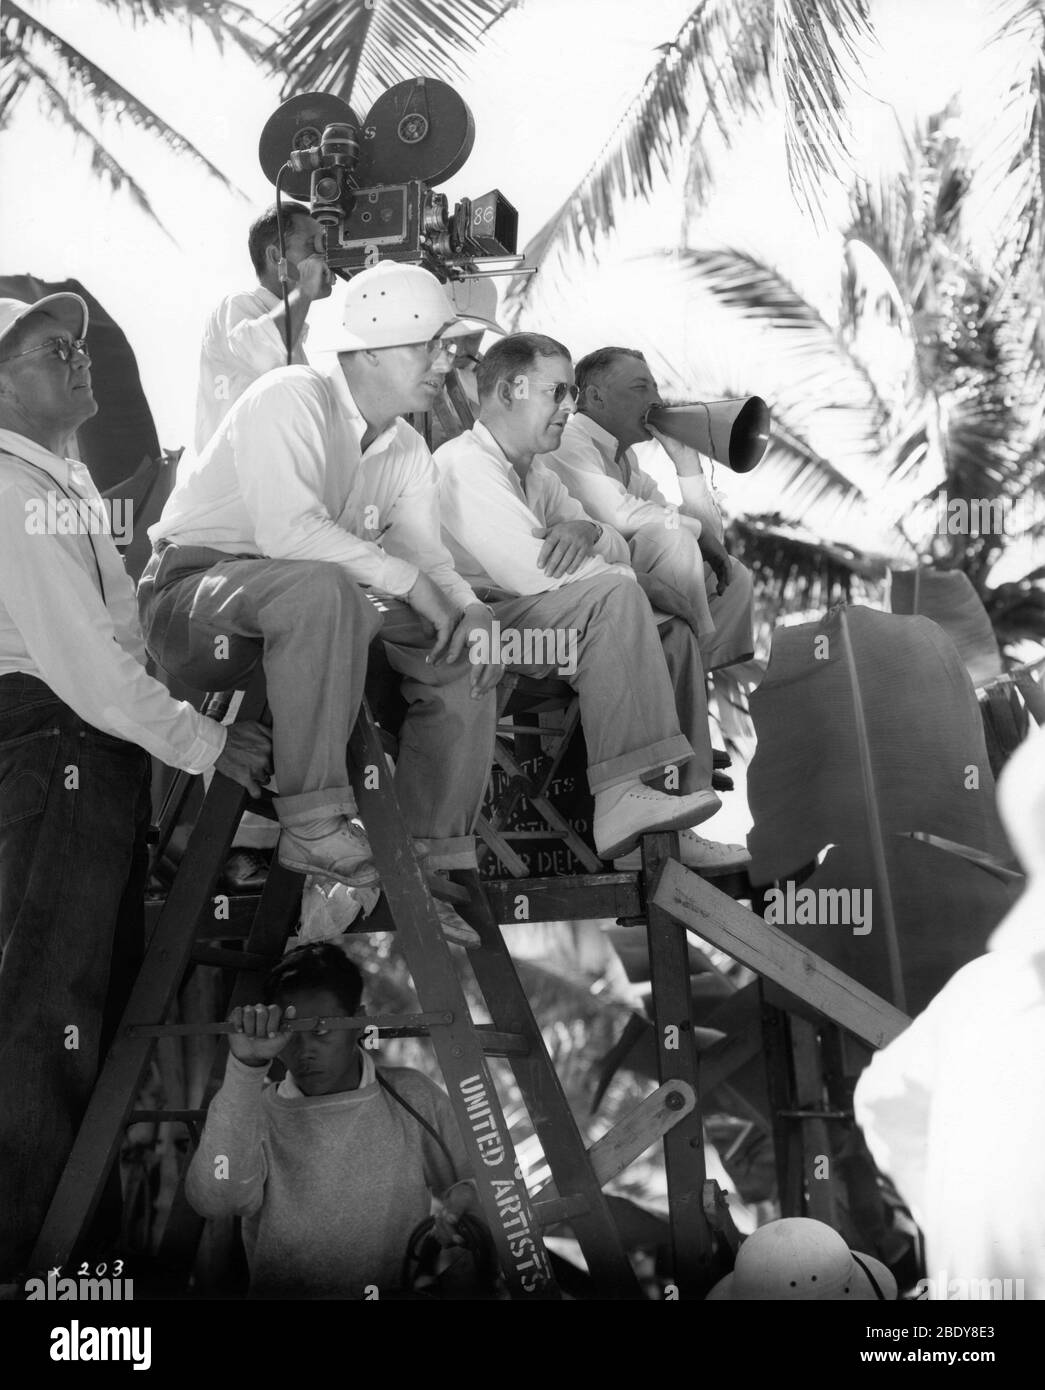 Director JOHN FORD and Camera Crew on set location candid during filming of THE HURRICANE 1937 novel Charles Nordhoff and James Norman Hall special effects James Basevi The Samuel Goldwyn Company / United Artists Stock Photo